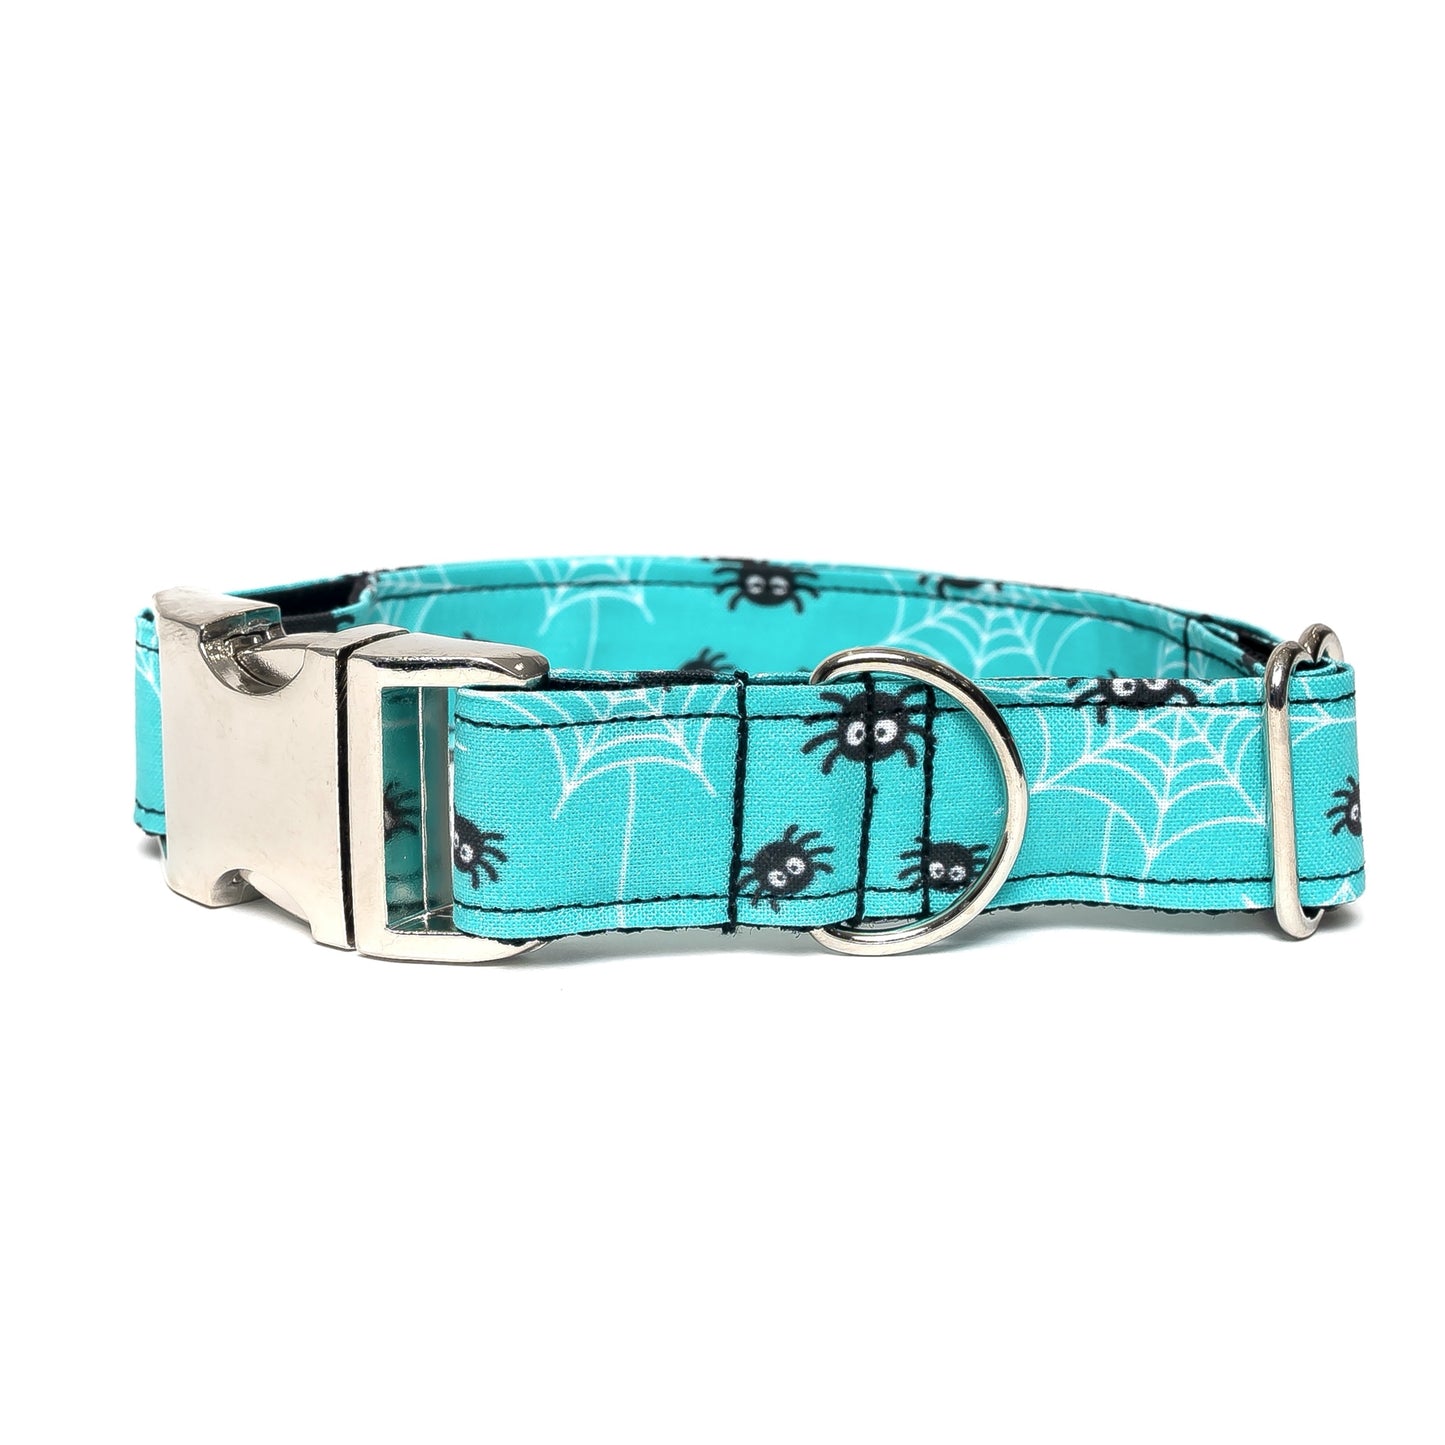 TEAL WITH SPIDERS - DOG COLLAR